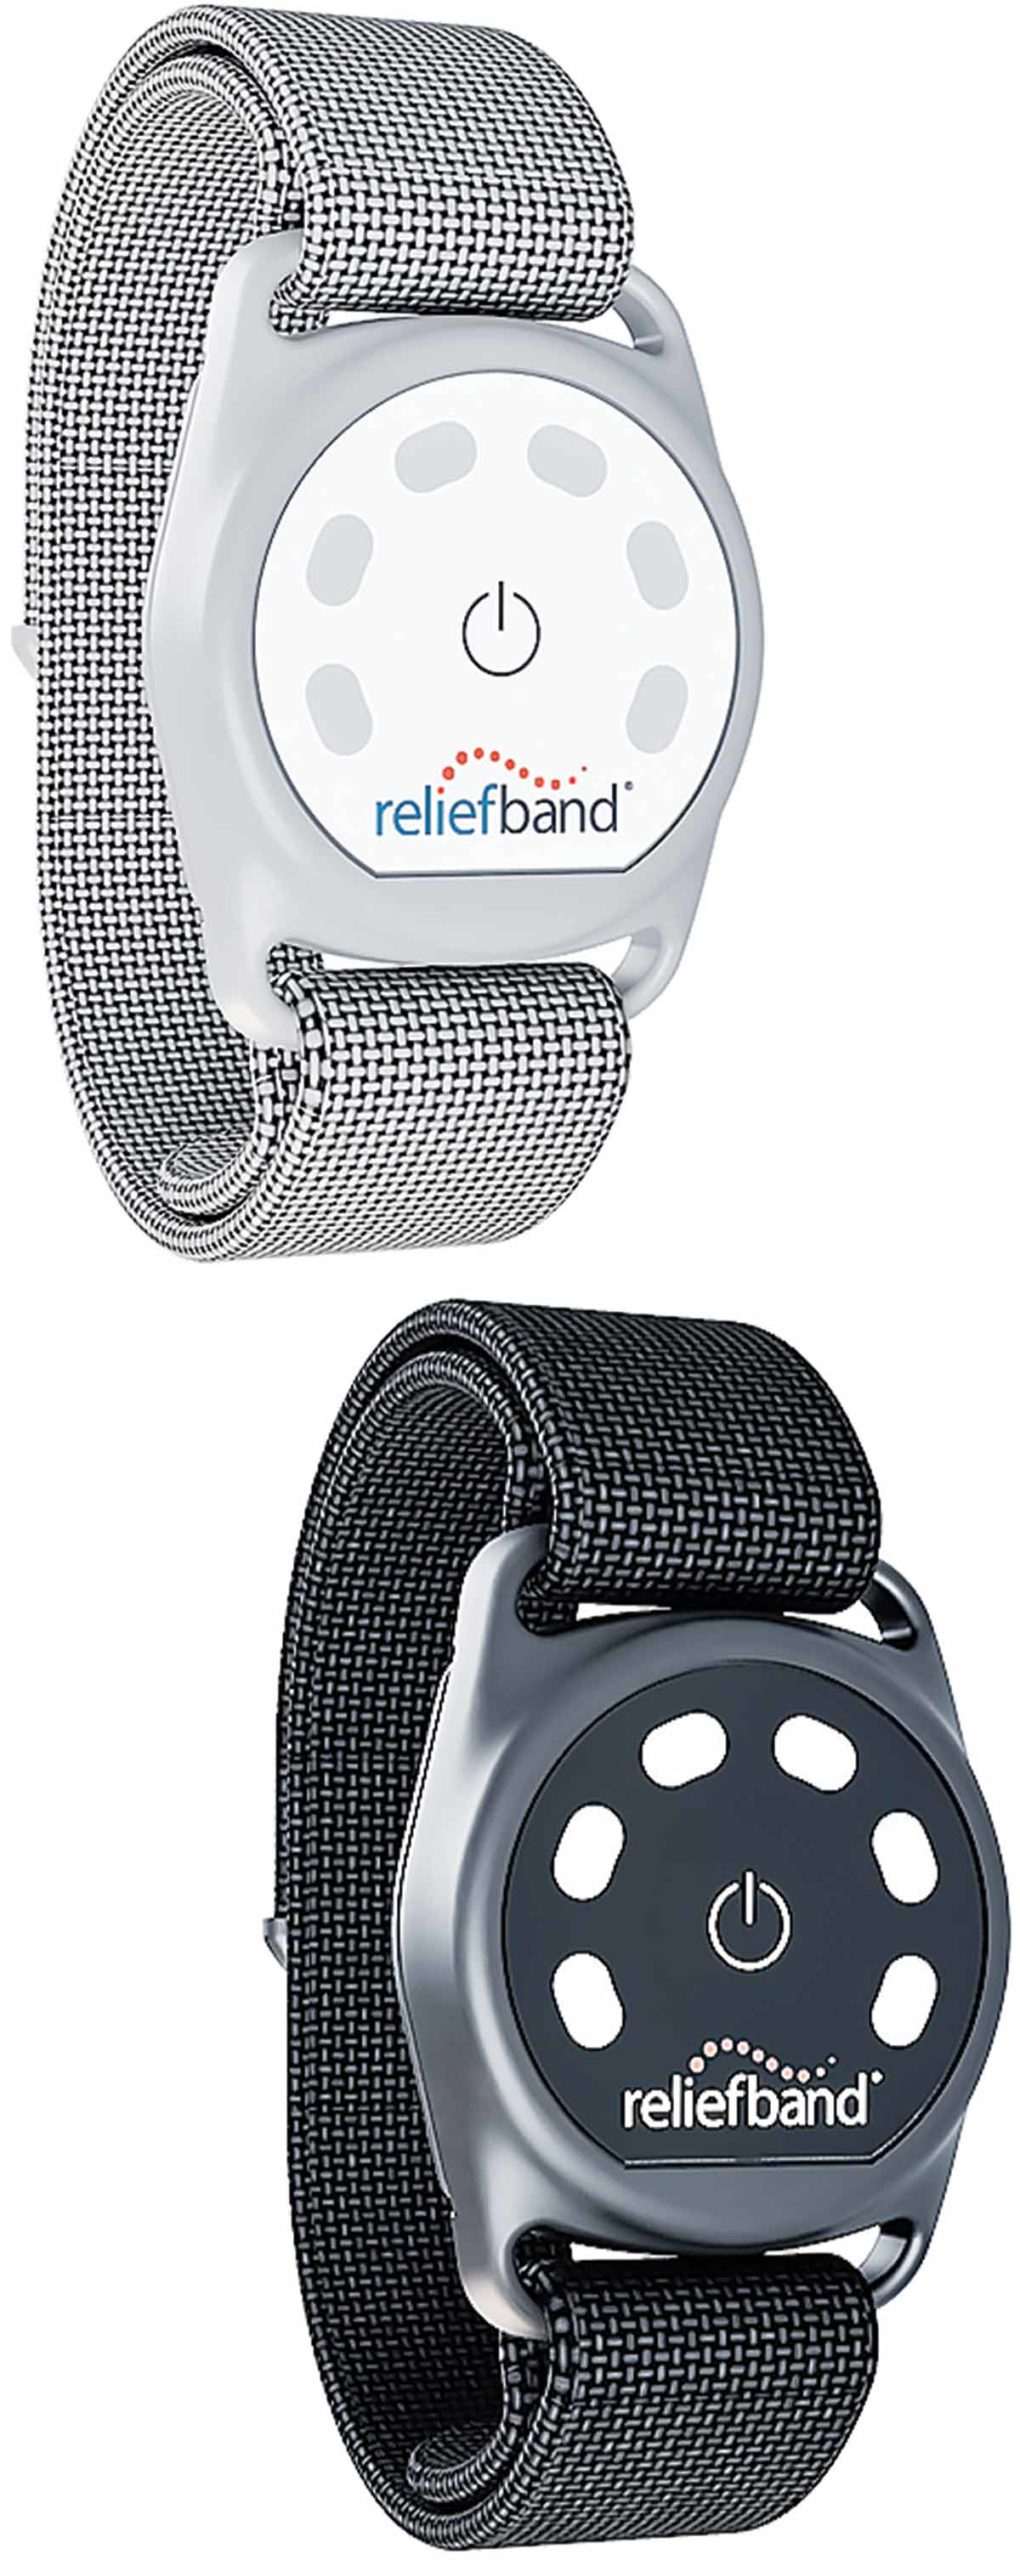 relief band in light gray and black